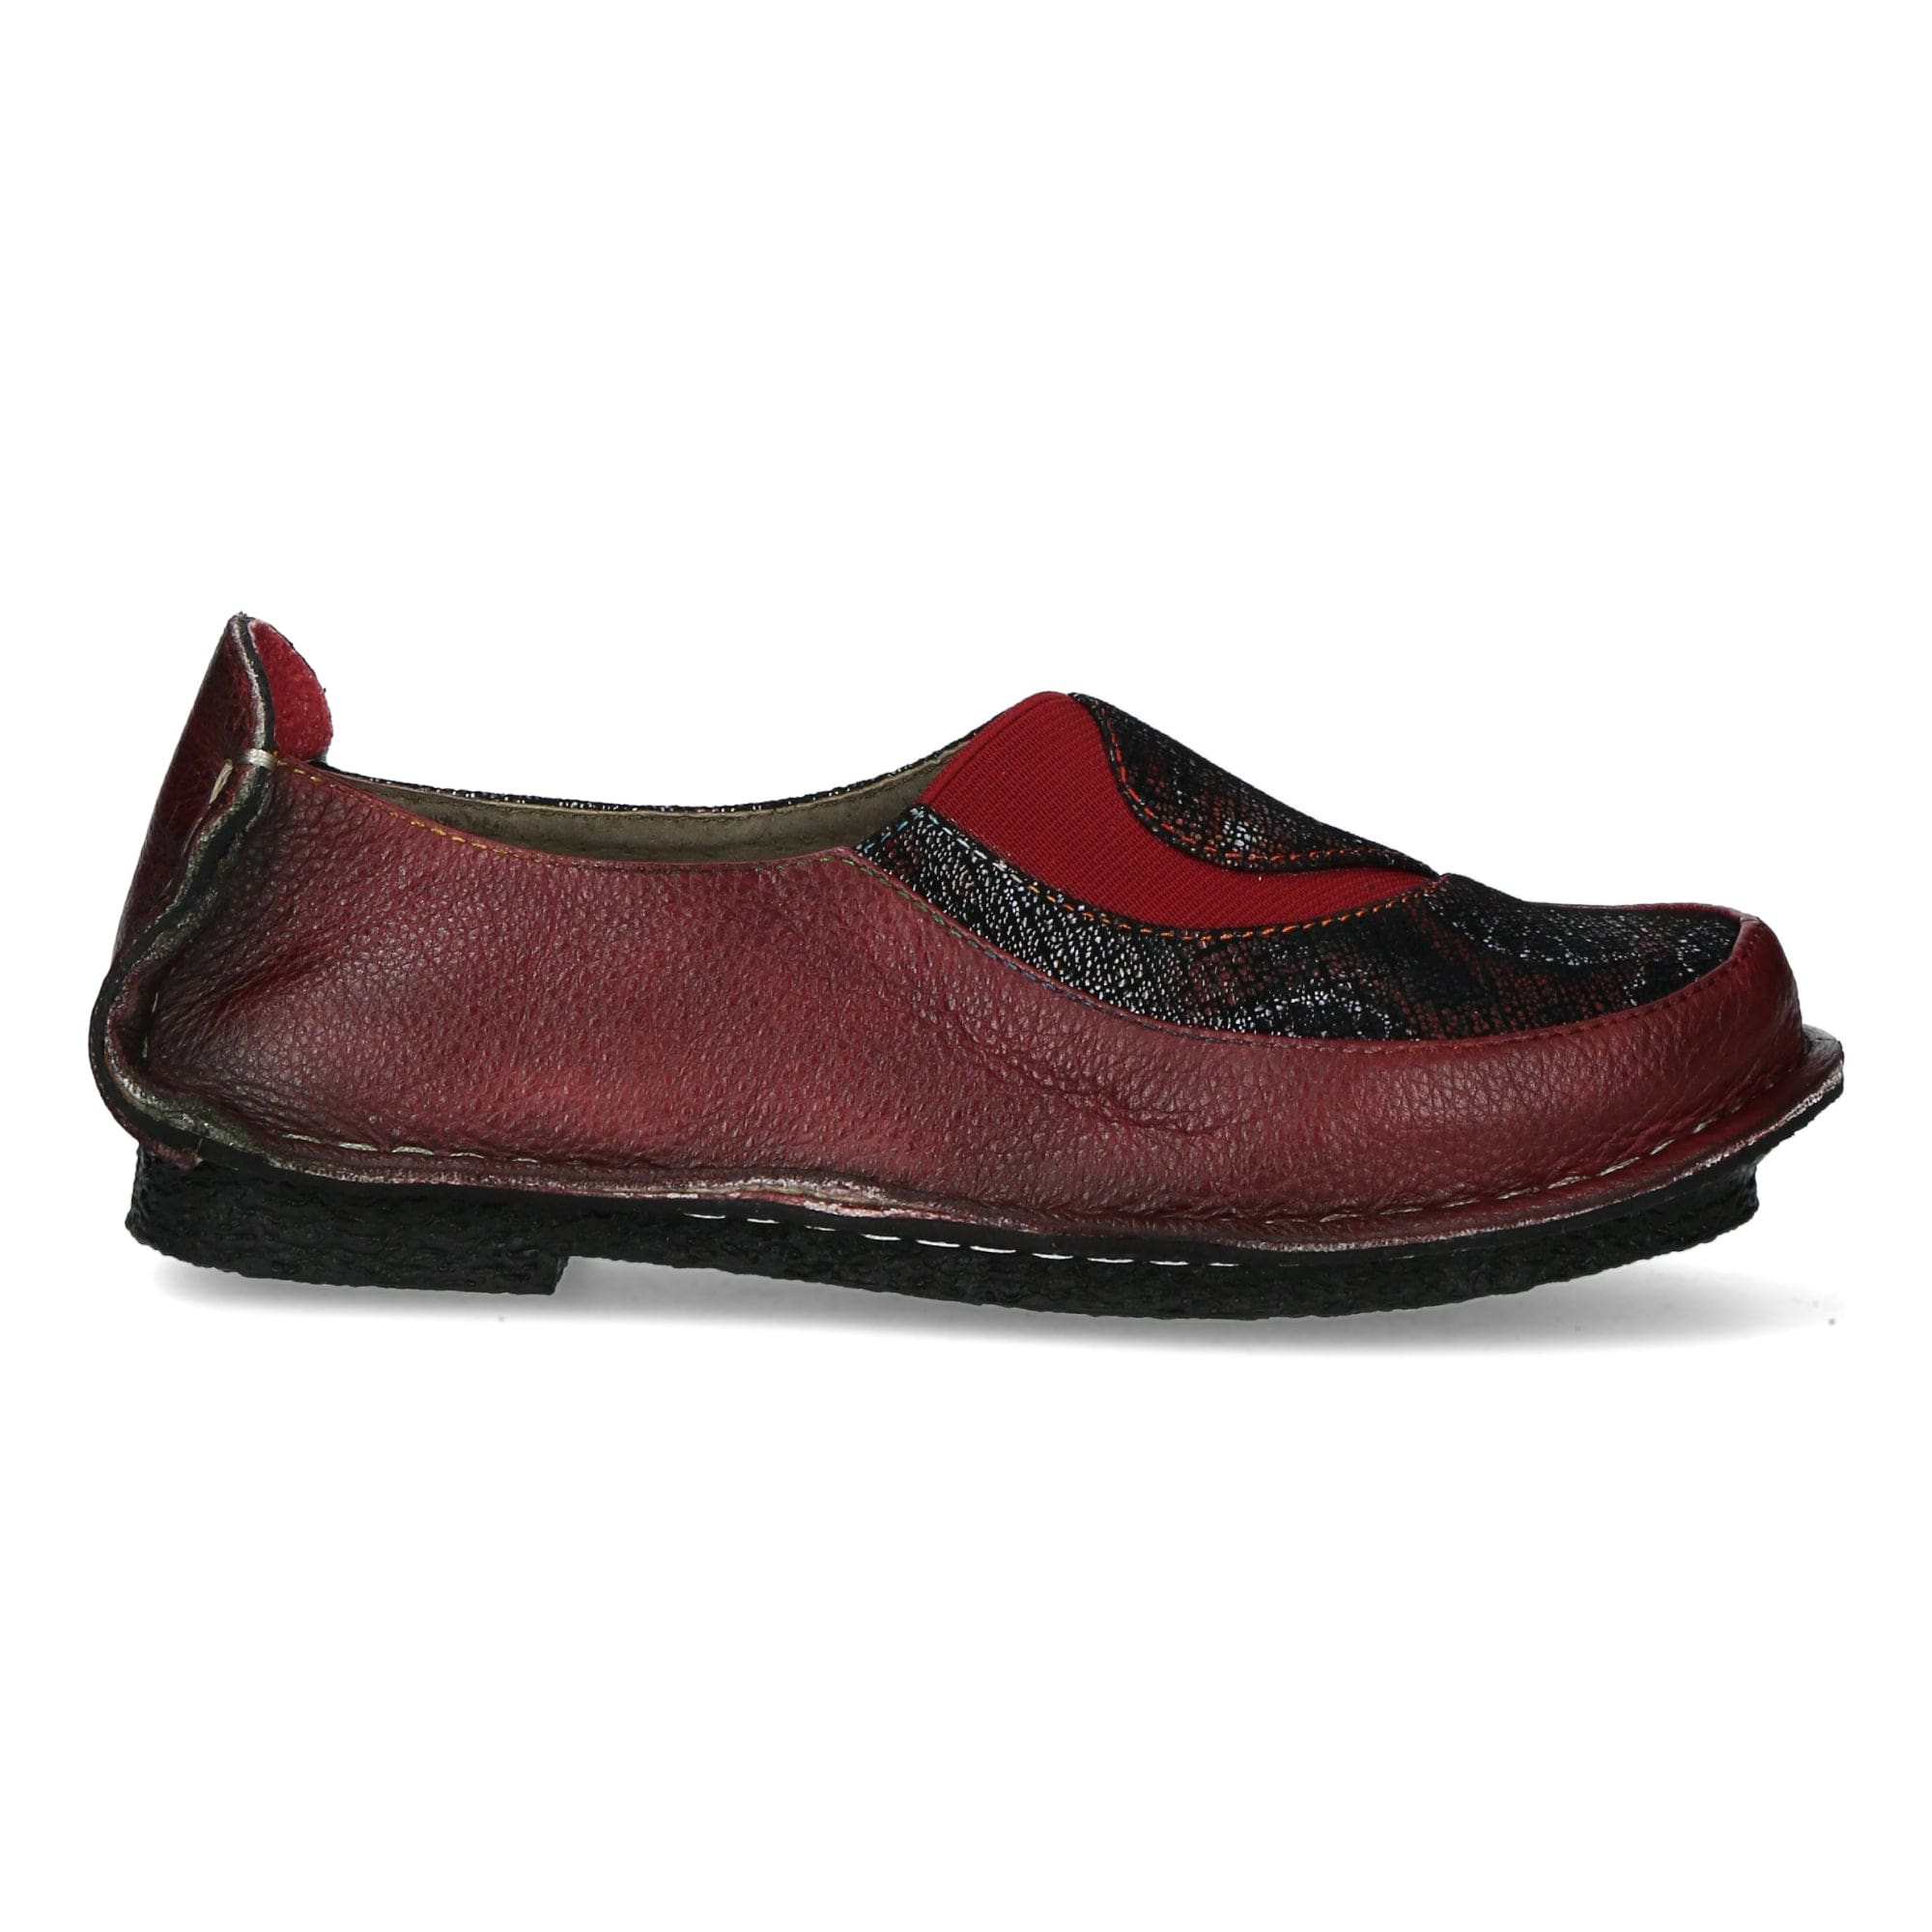 AUDREY 25 - 35 / Red - Moccasin